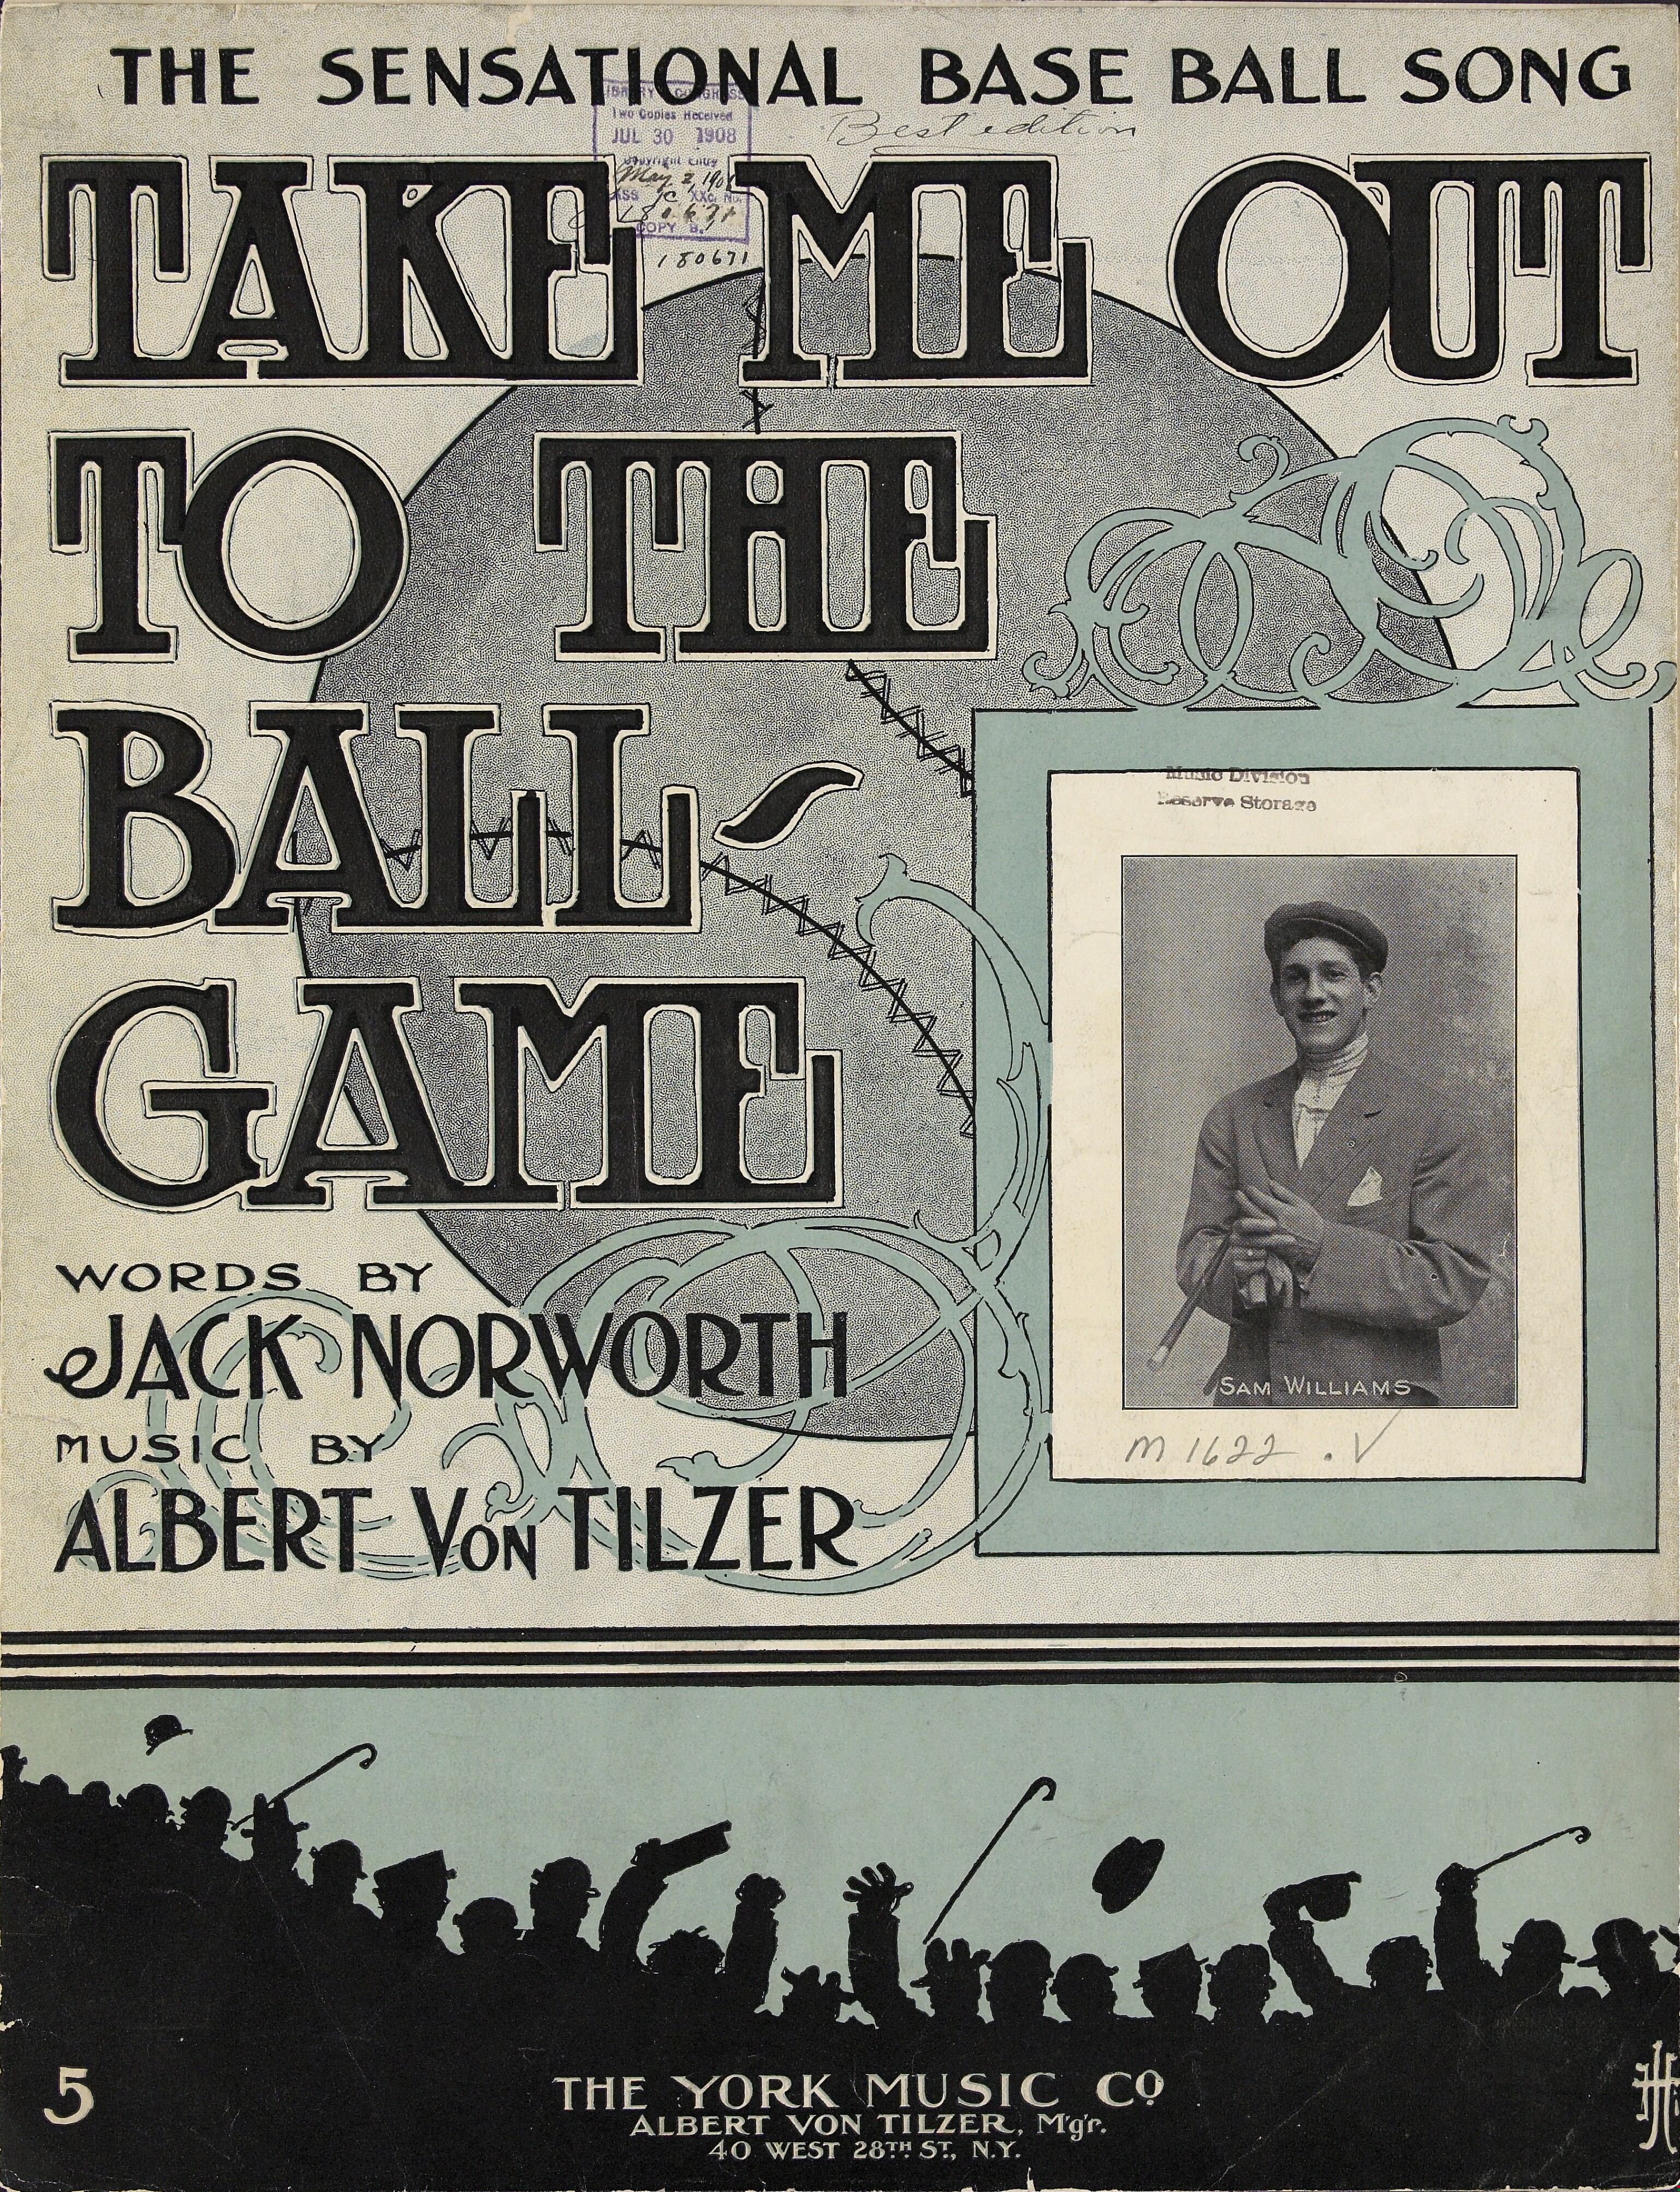 "Take me out to the ball game" cover